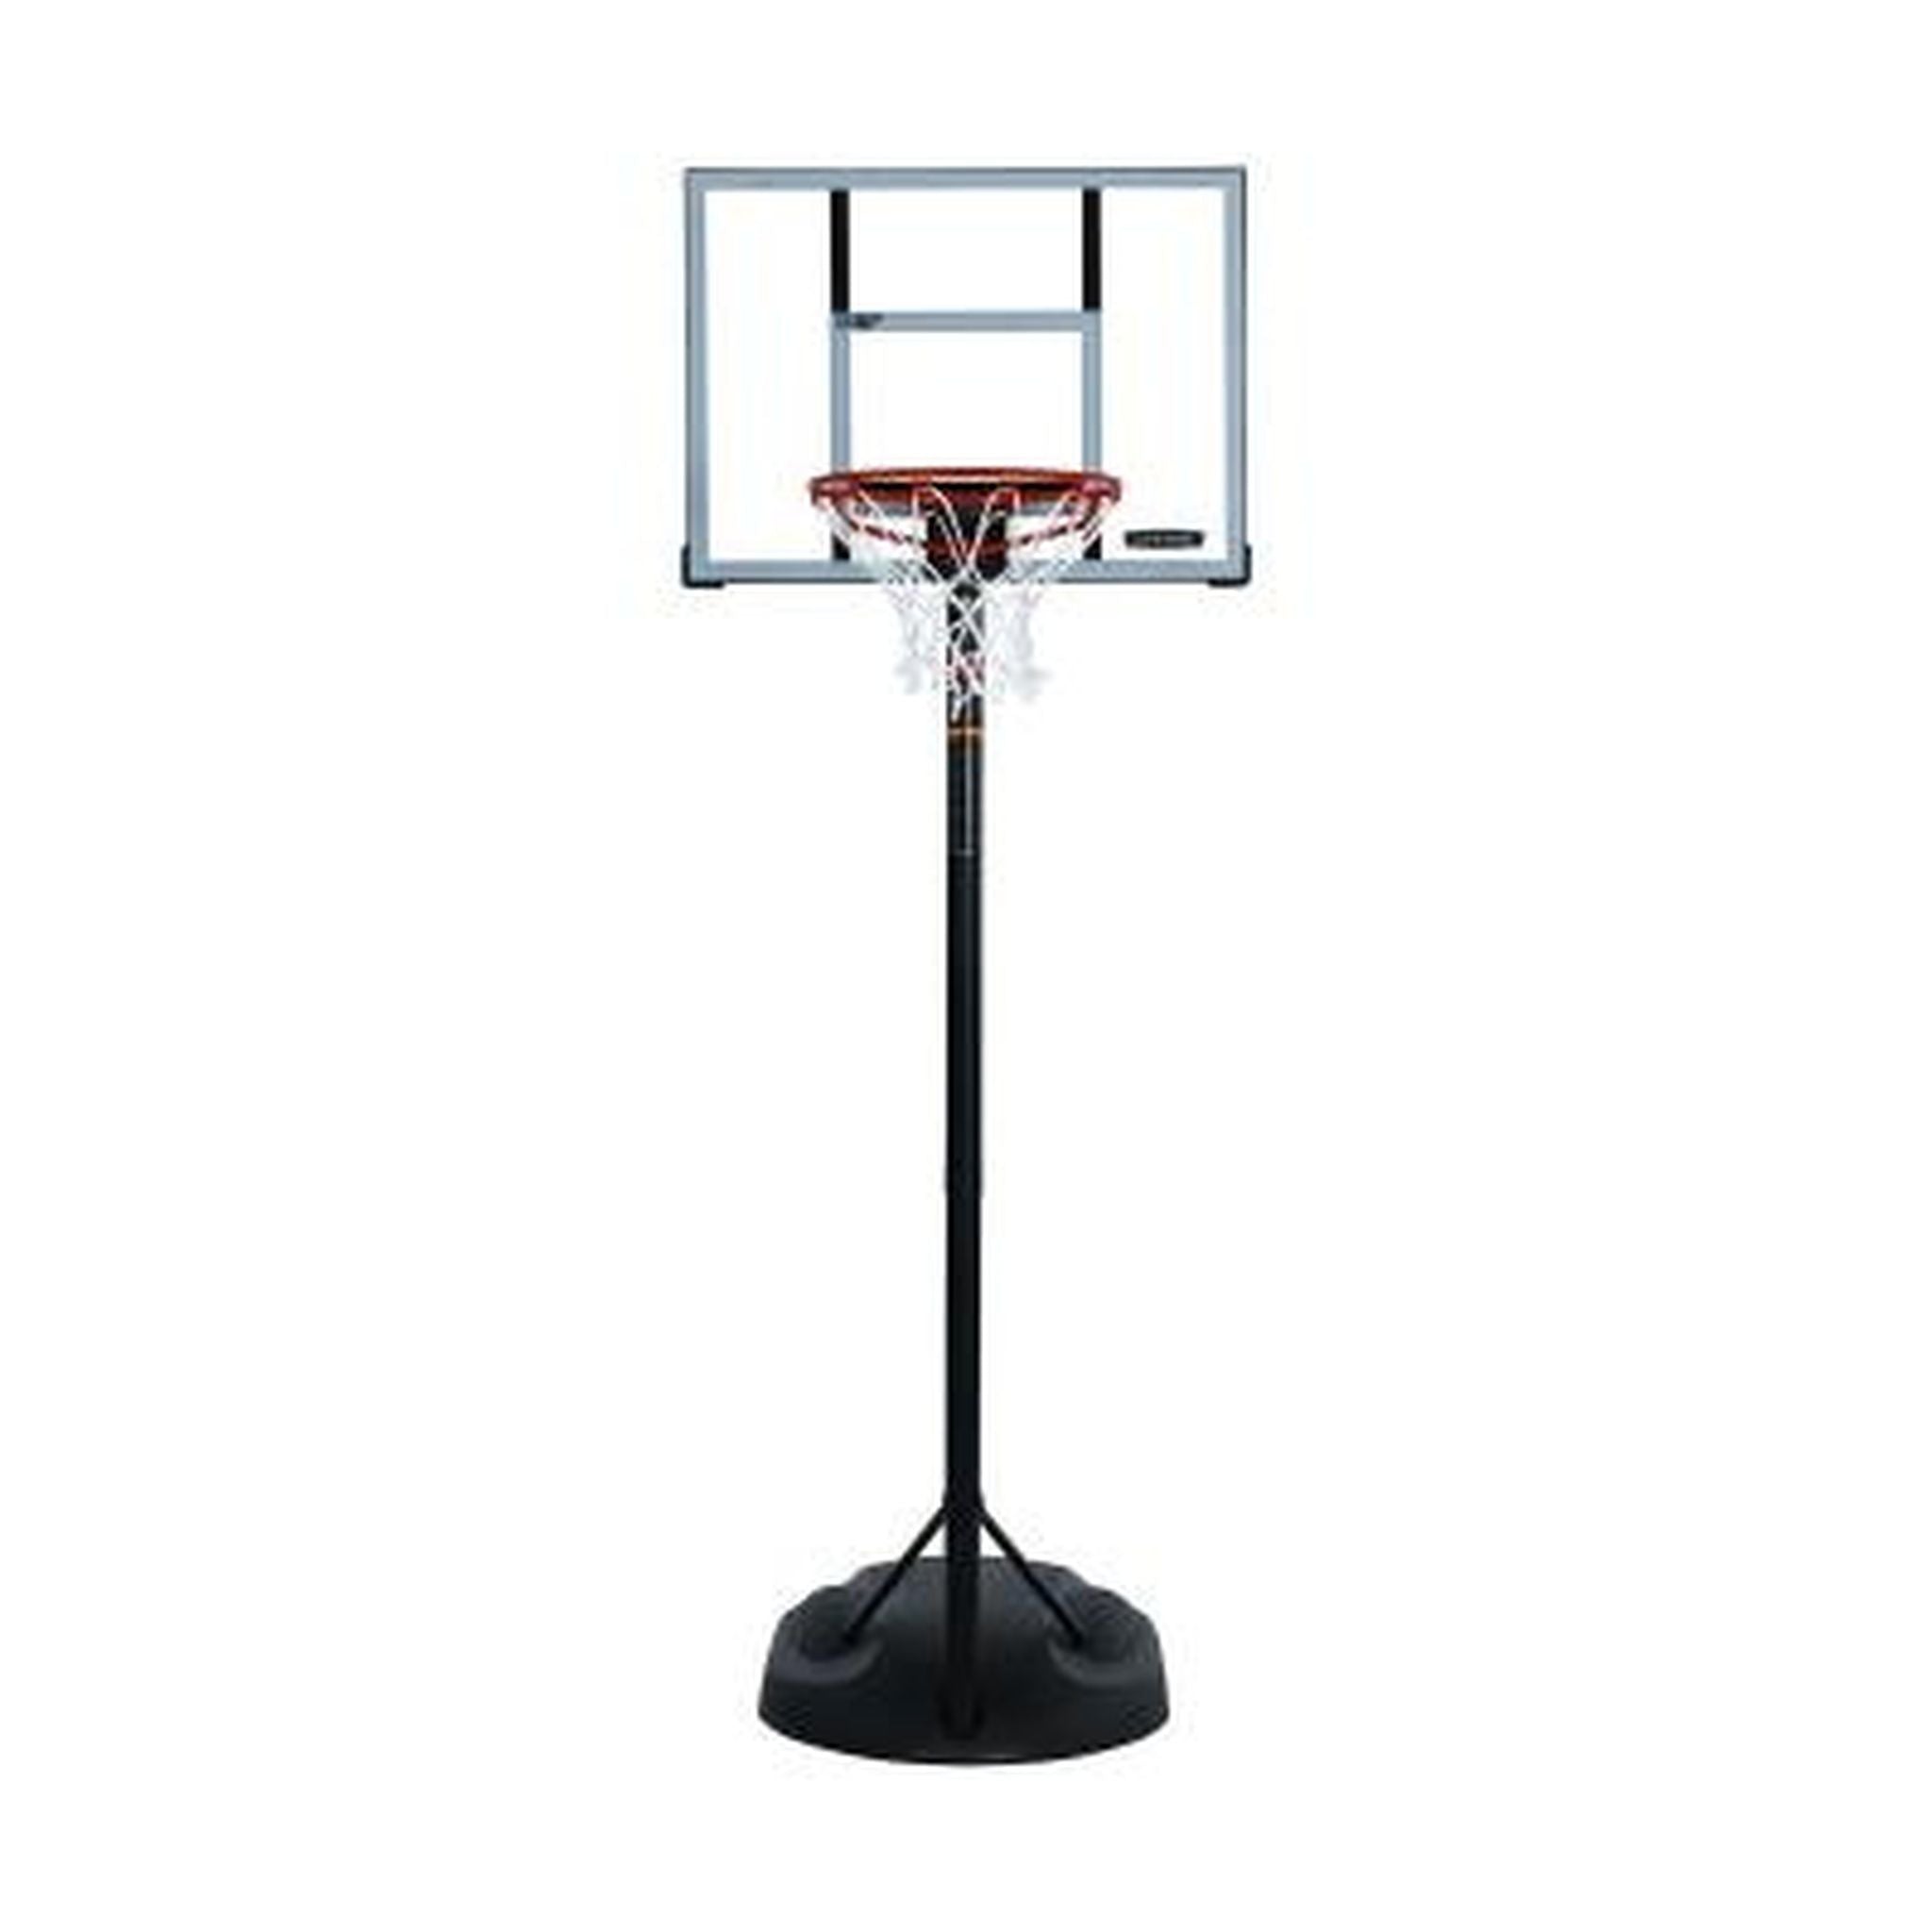 LIFETIME 30-inch Youth Polycarbonate Portable Basketball System